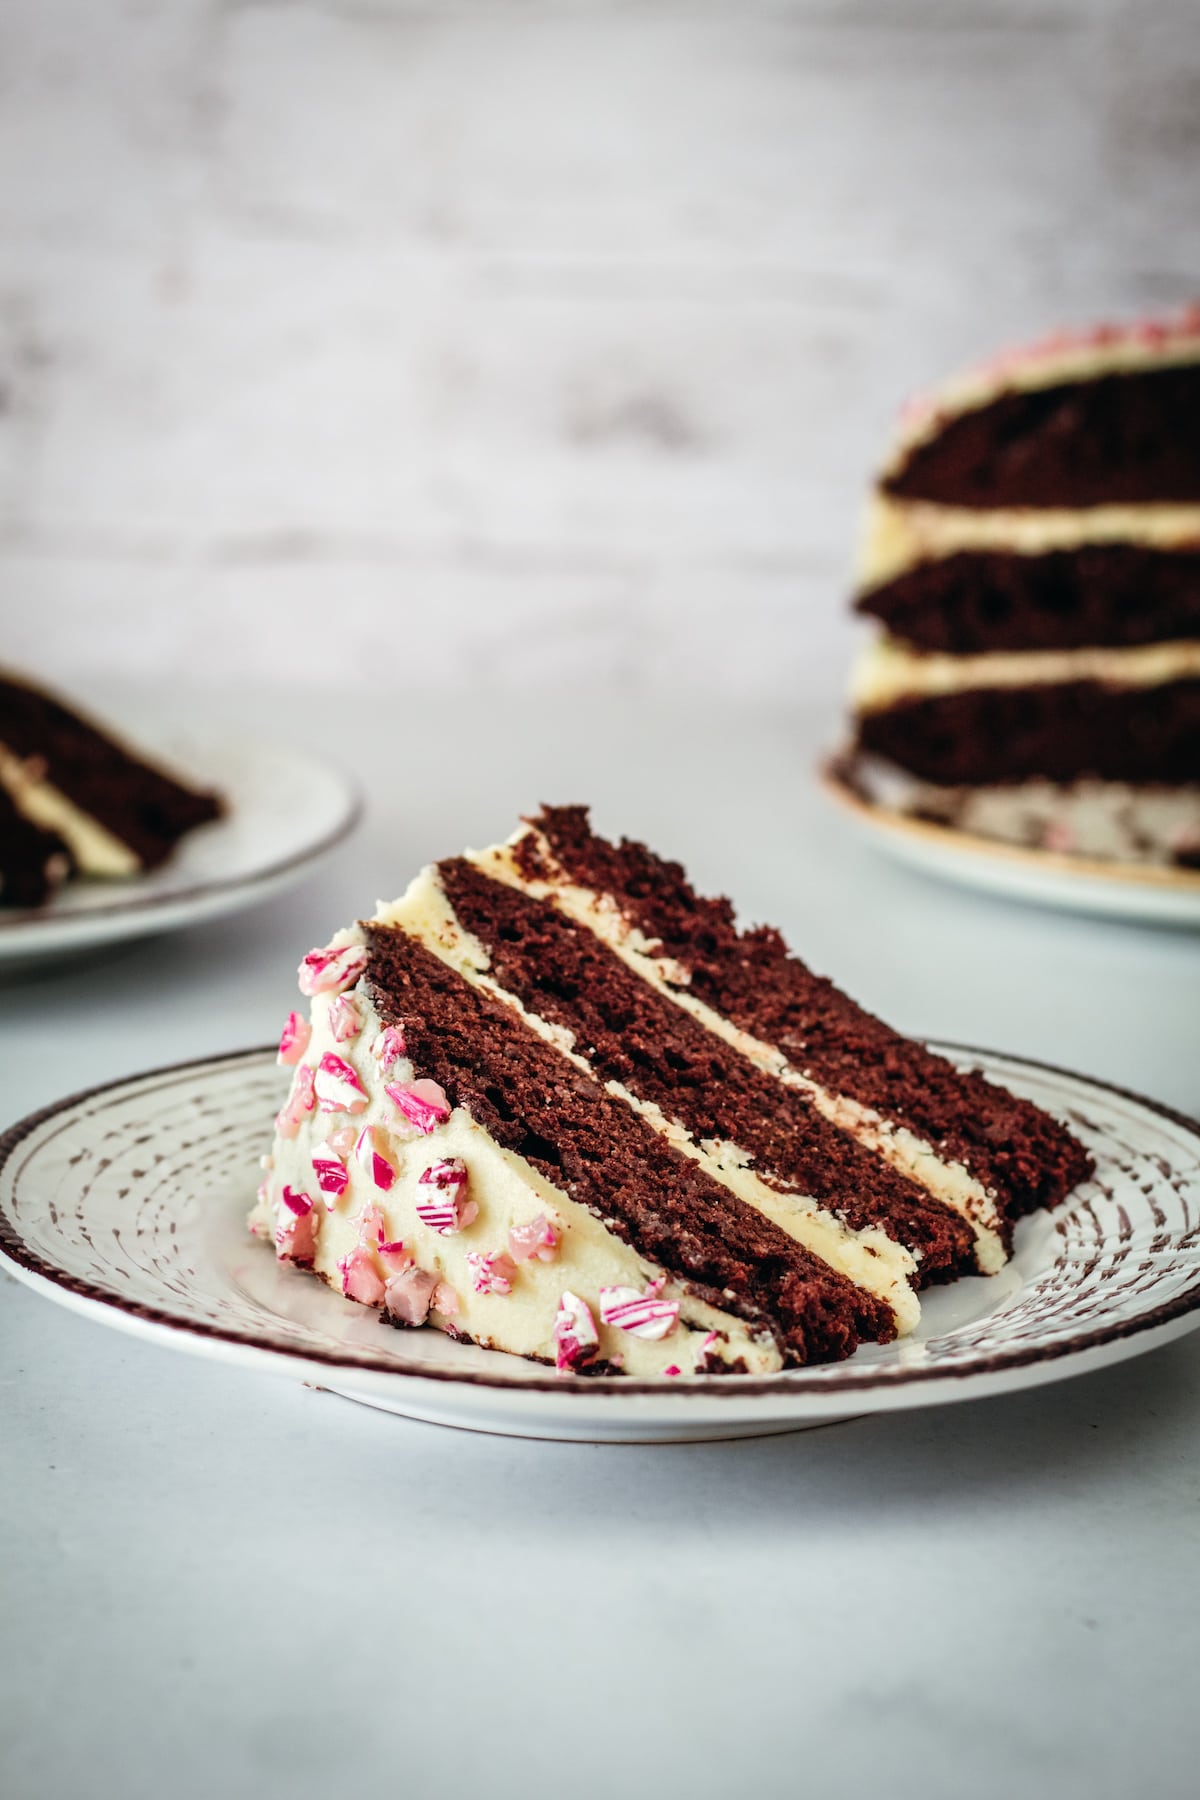 Slice of chocolate peppermint cake on plate with whole cake in background